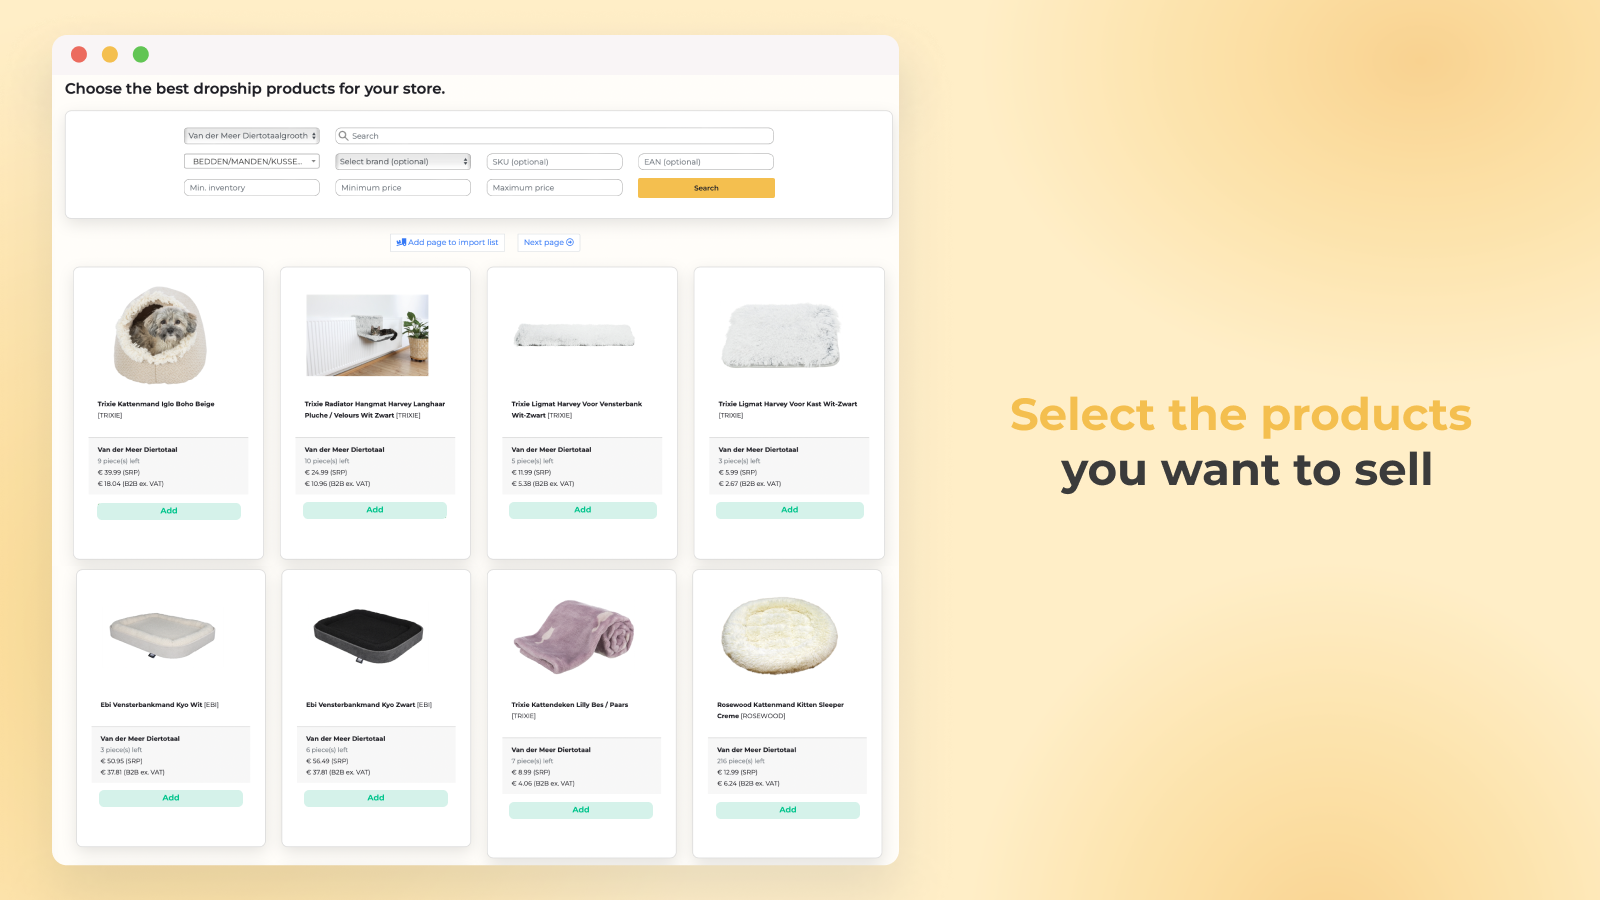 Search, select and filter the dropship products you want to sell